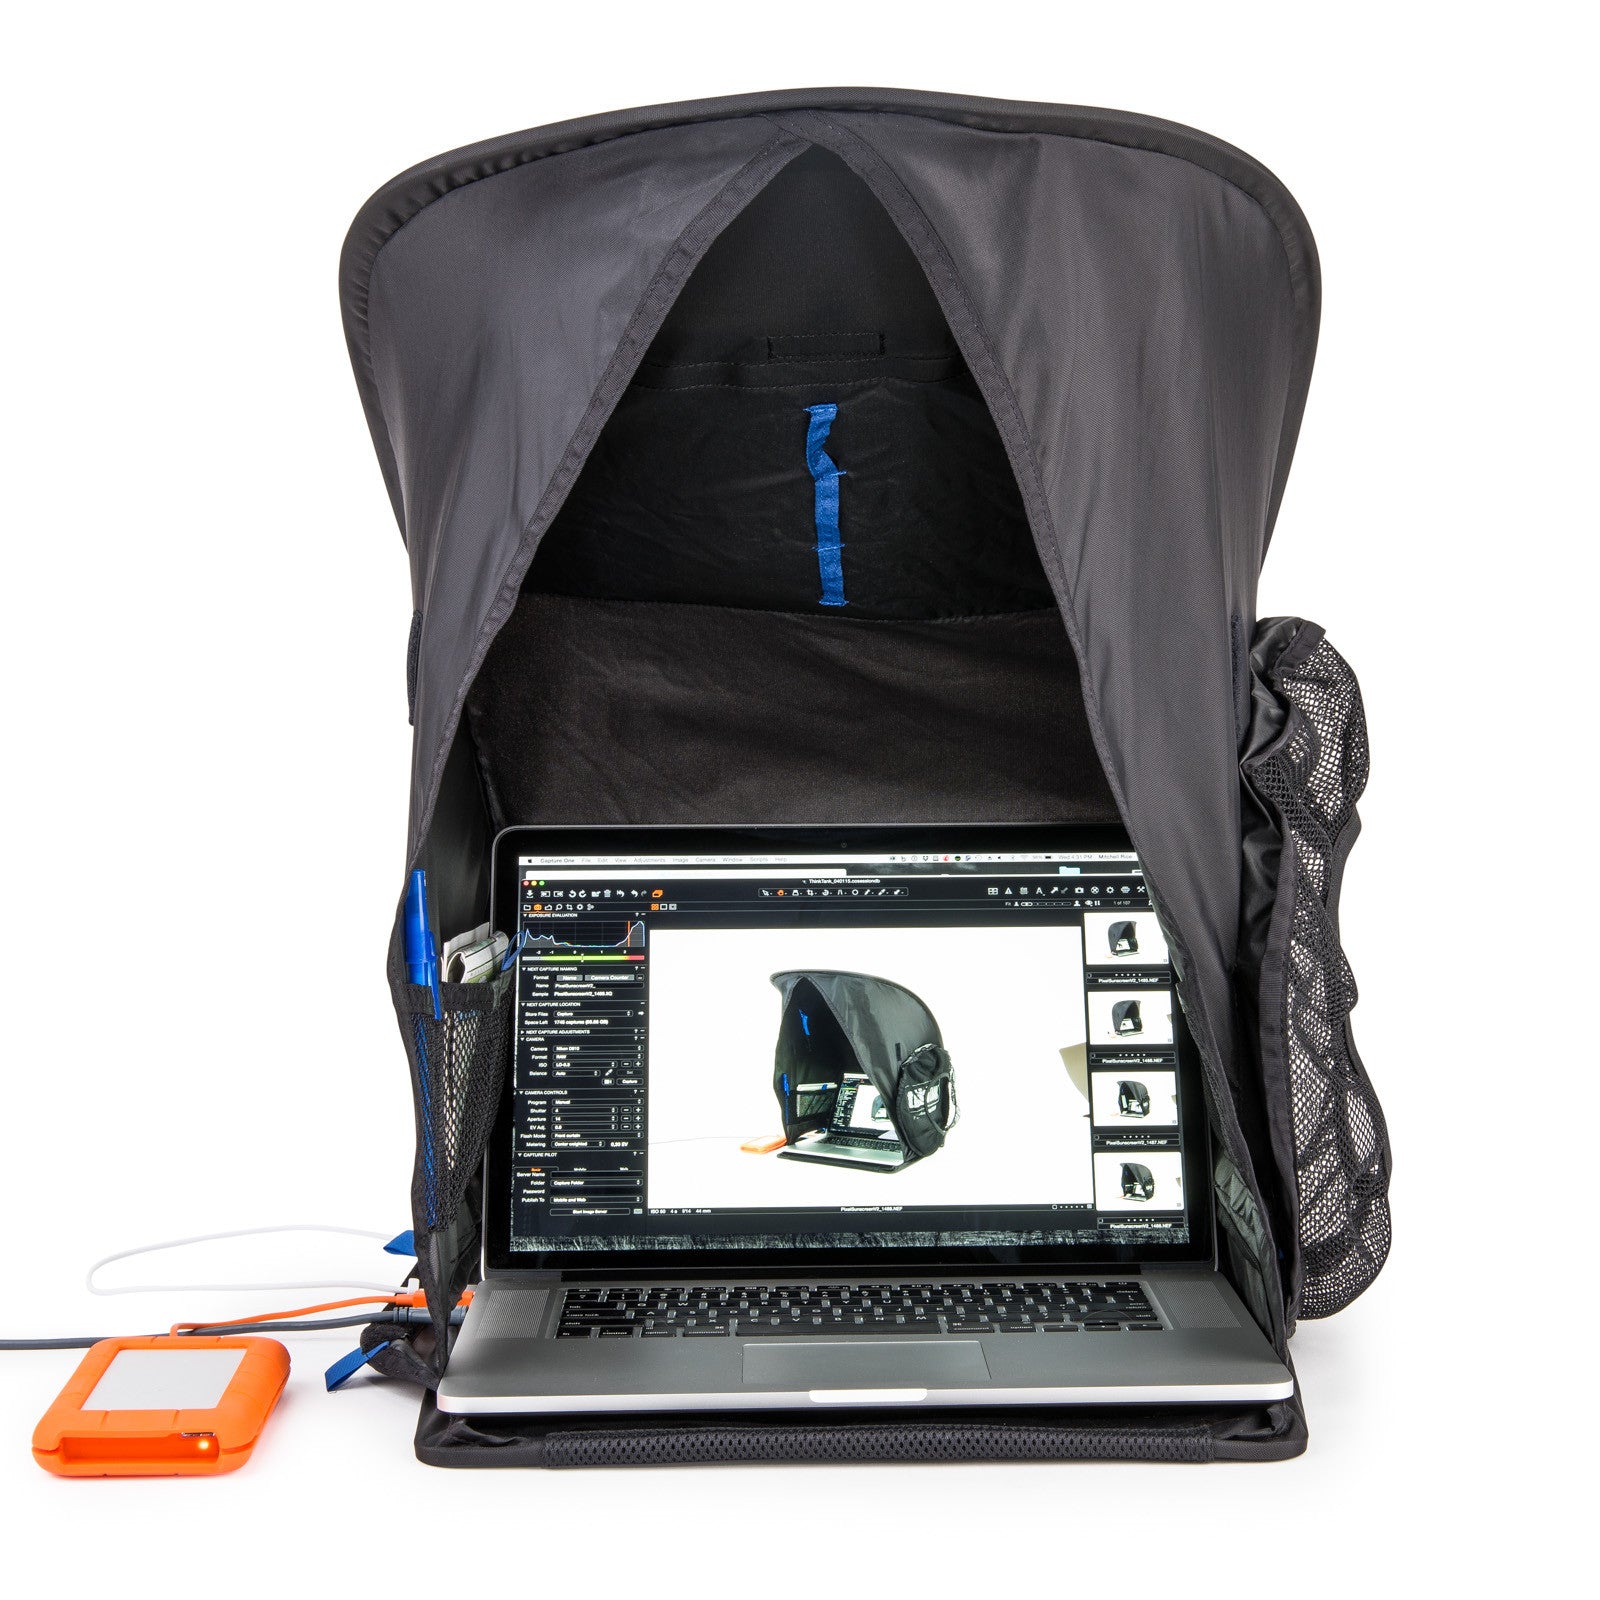 Portable sun shade for up to 17" laptops and monitors; collapses for compact storage